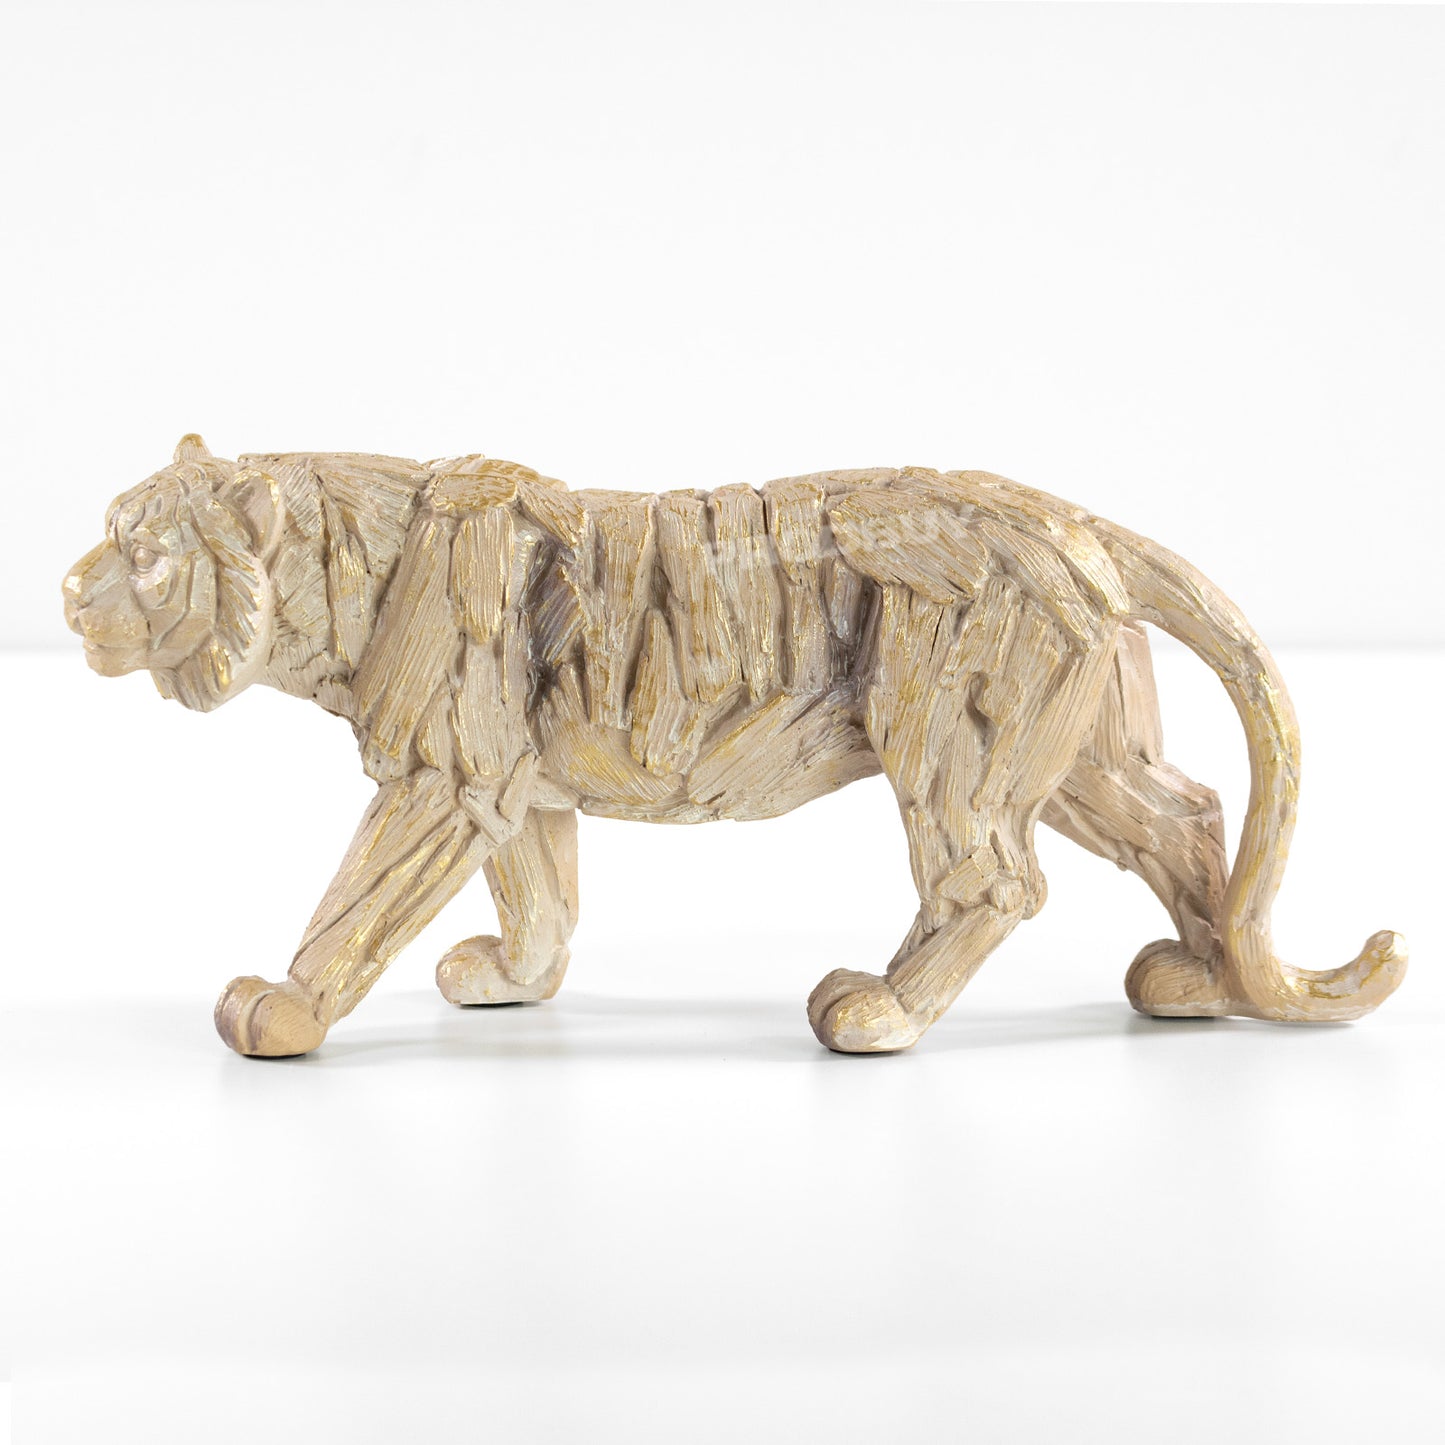 32cm Tiger Ornament Driftwood Style Resin Material